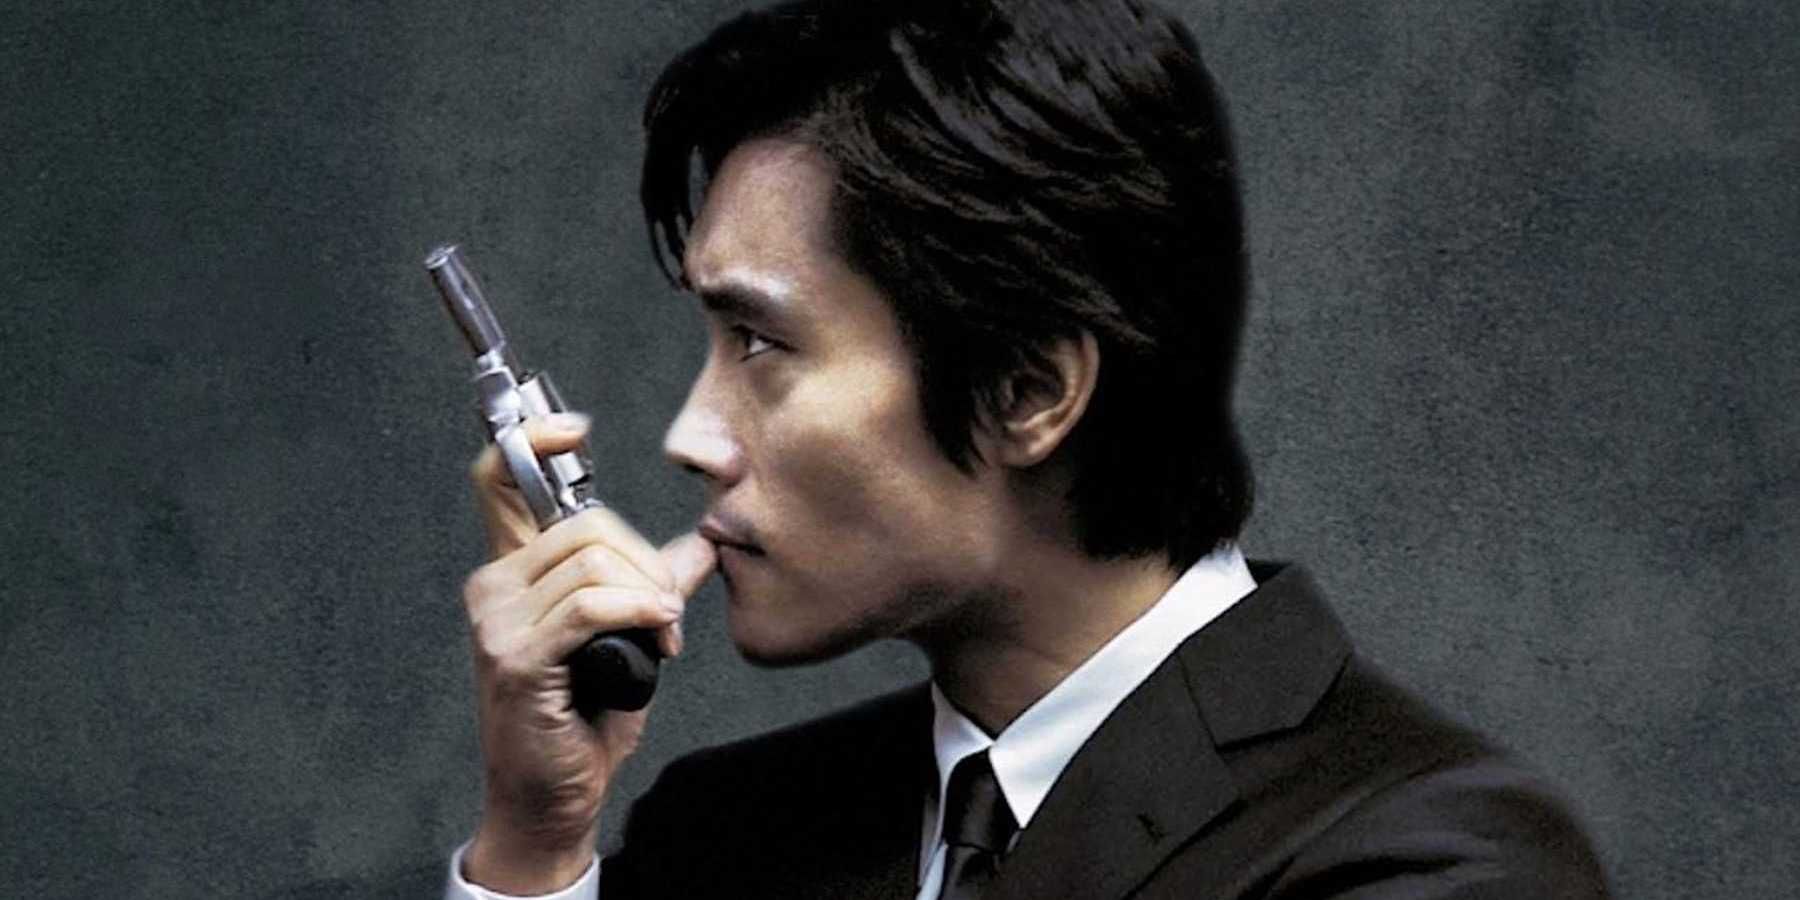 Sun-woo holds a revolver up in front of his face in a promo image for A Bittersweet Life